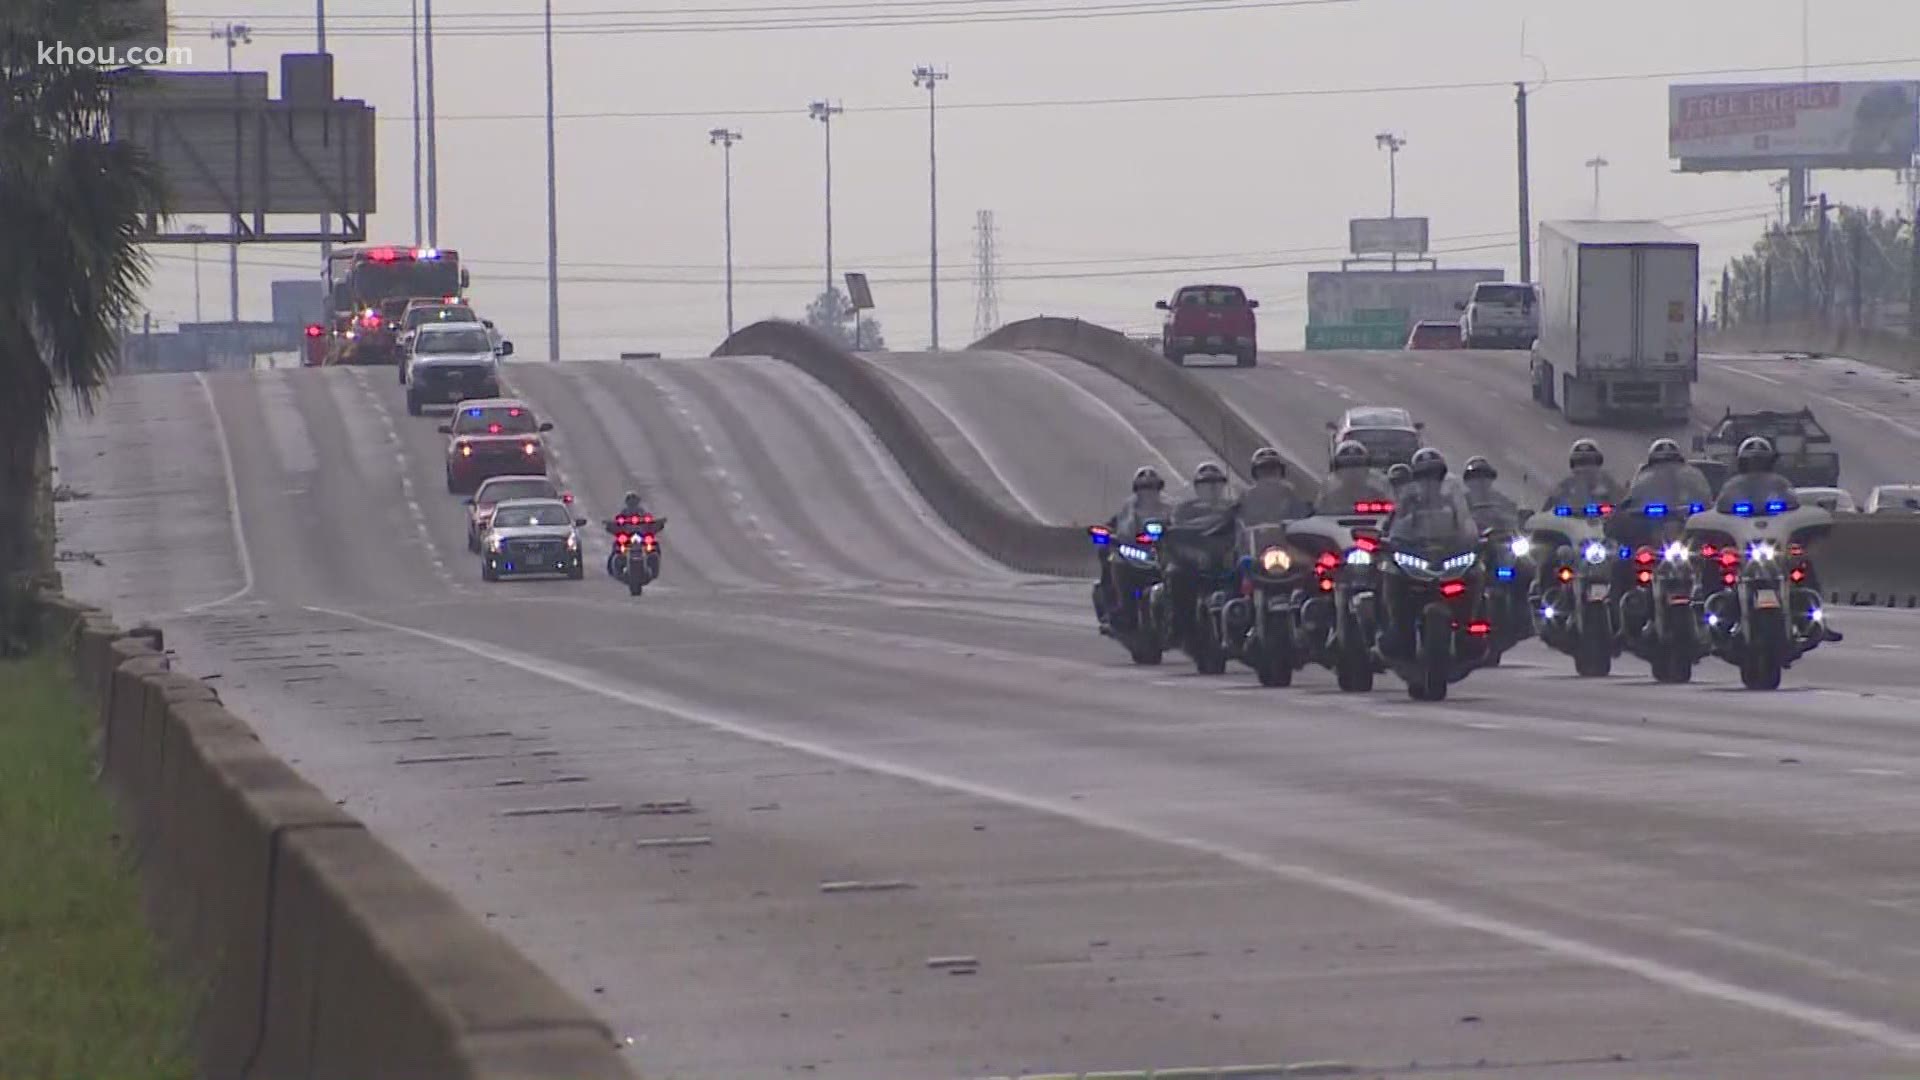 Houston firefighters honored fallen arson investigator Lemuel Bruce with a procession Monday from the medical examiner's office to the funeral home.